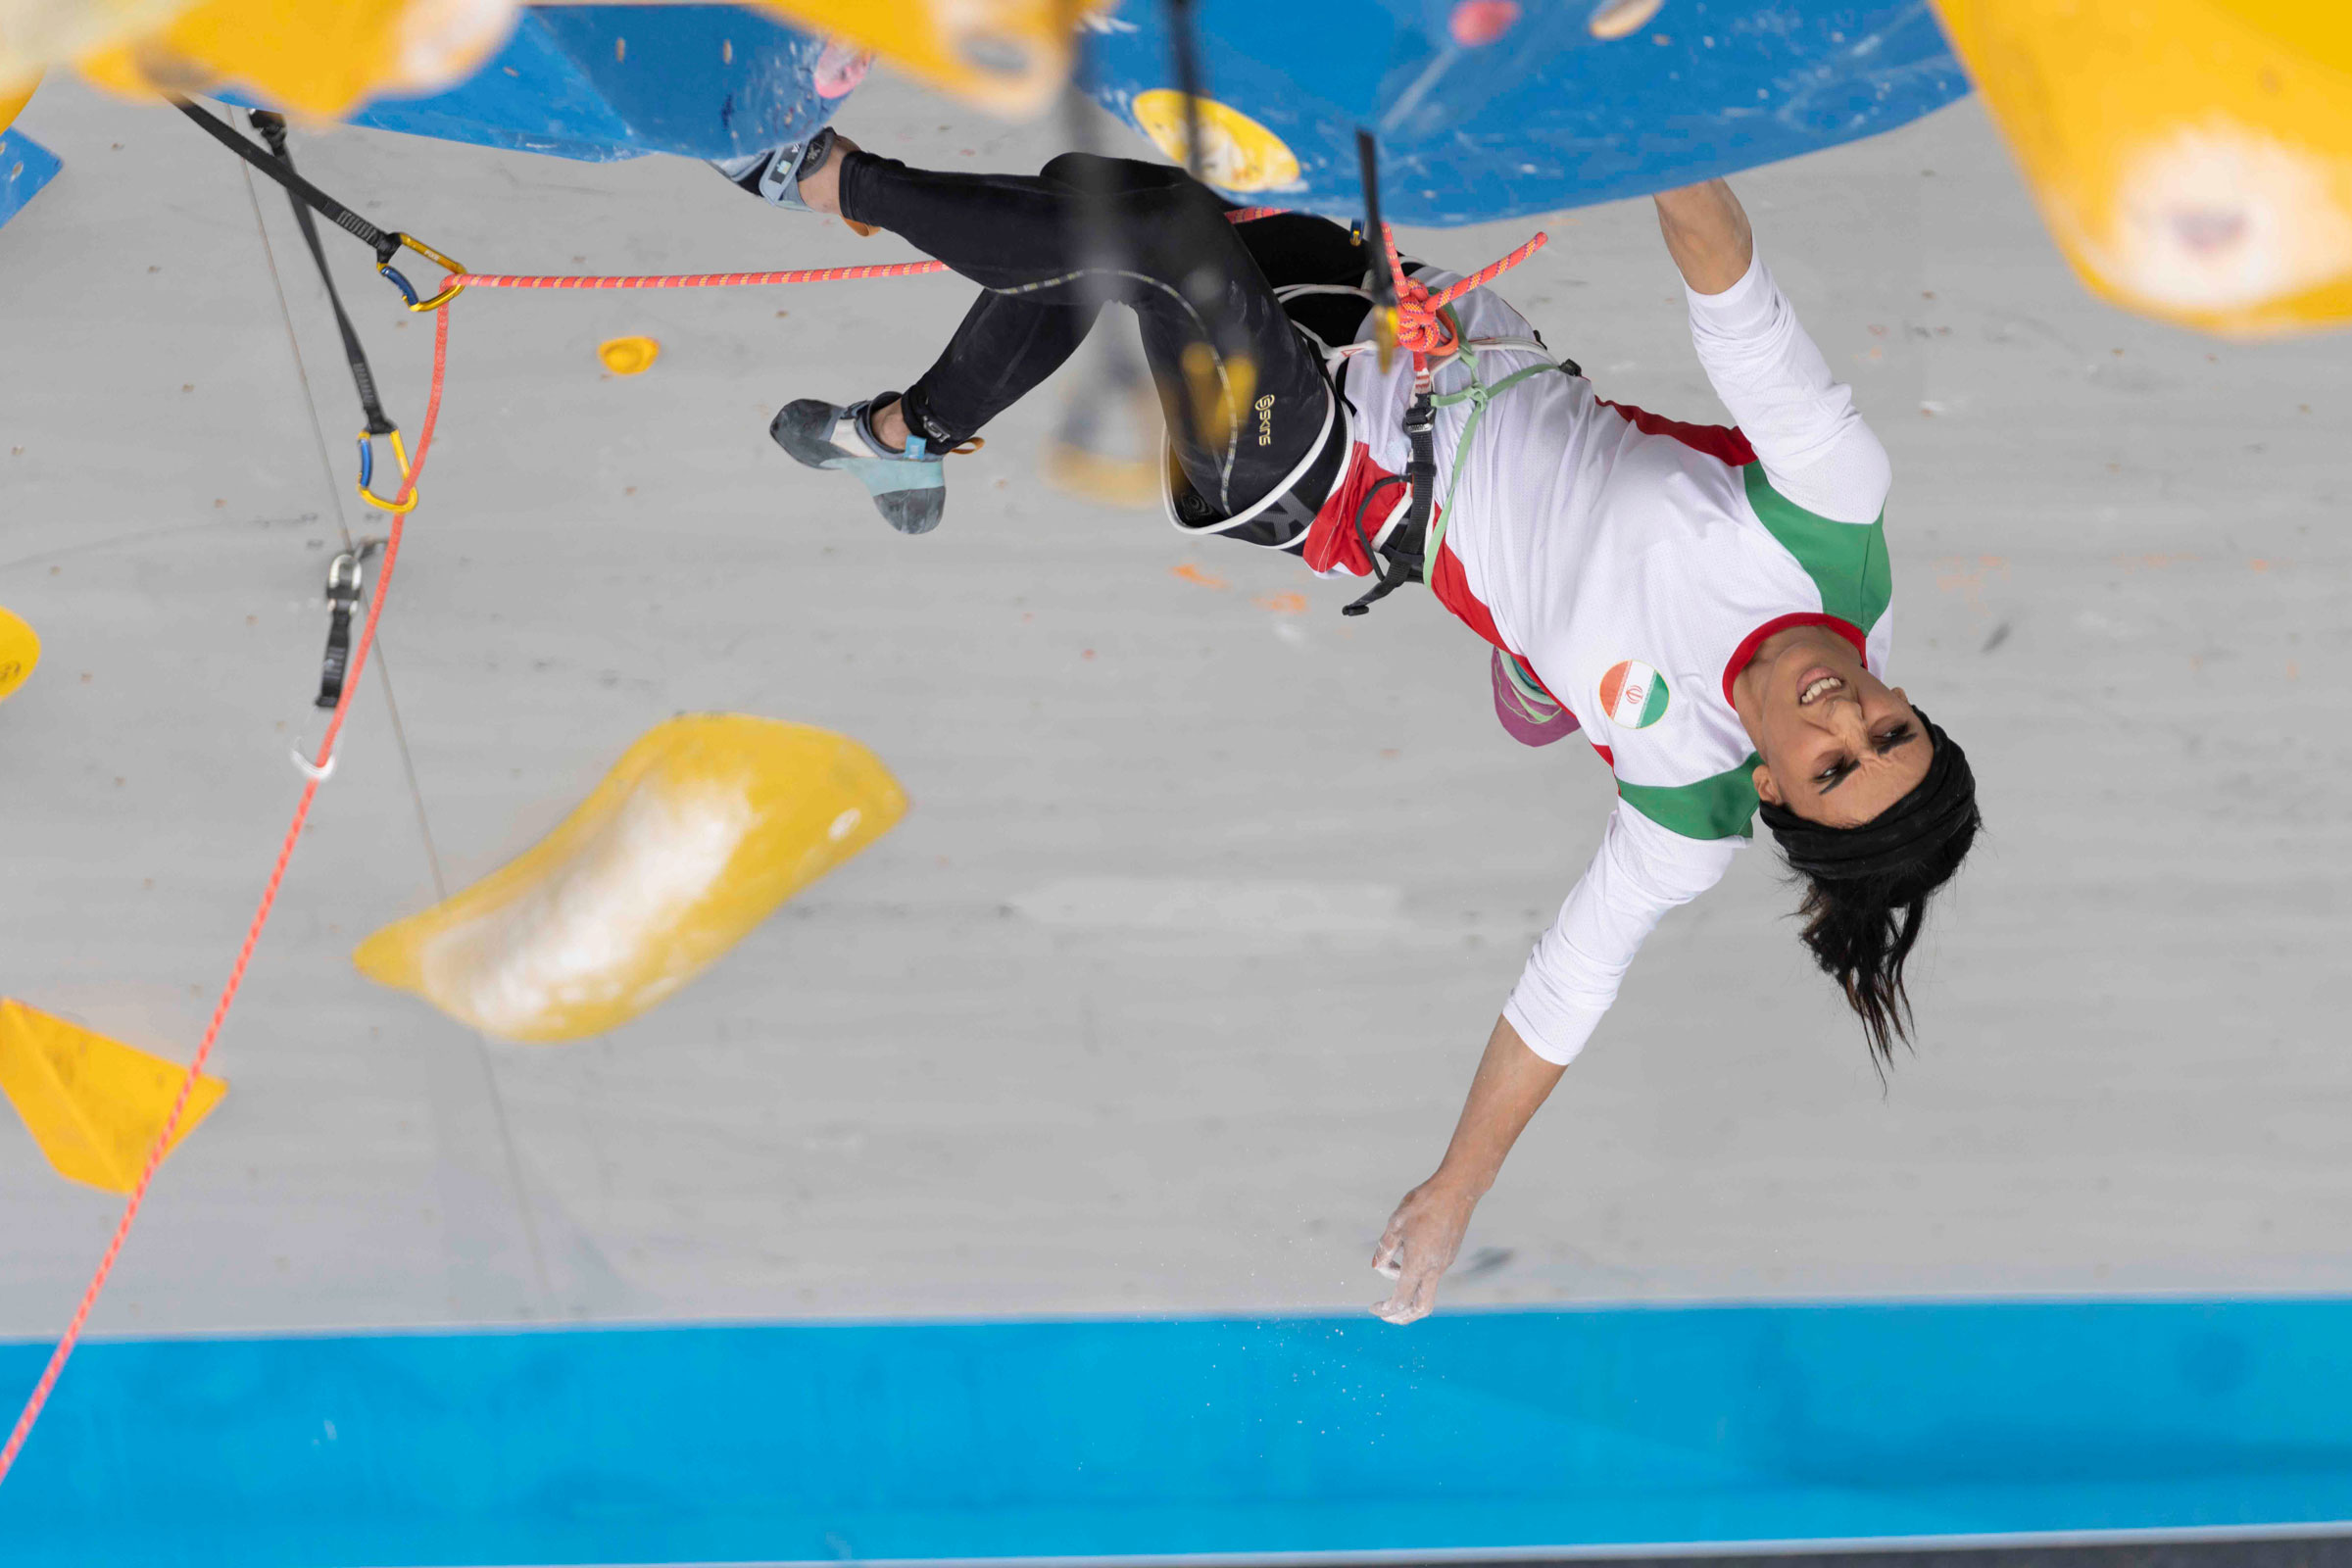 Iranian athlete Elnaz Rekabi competes during the women's Boulder & Lead final during the IFSC Climbing Asian Championships, in Seoul, on Oct. 16, 2022.